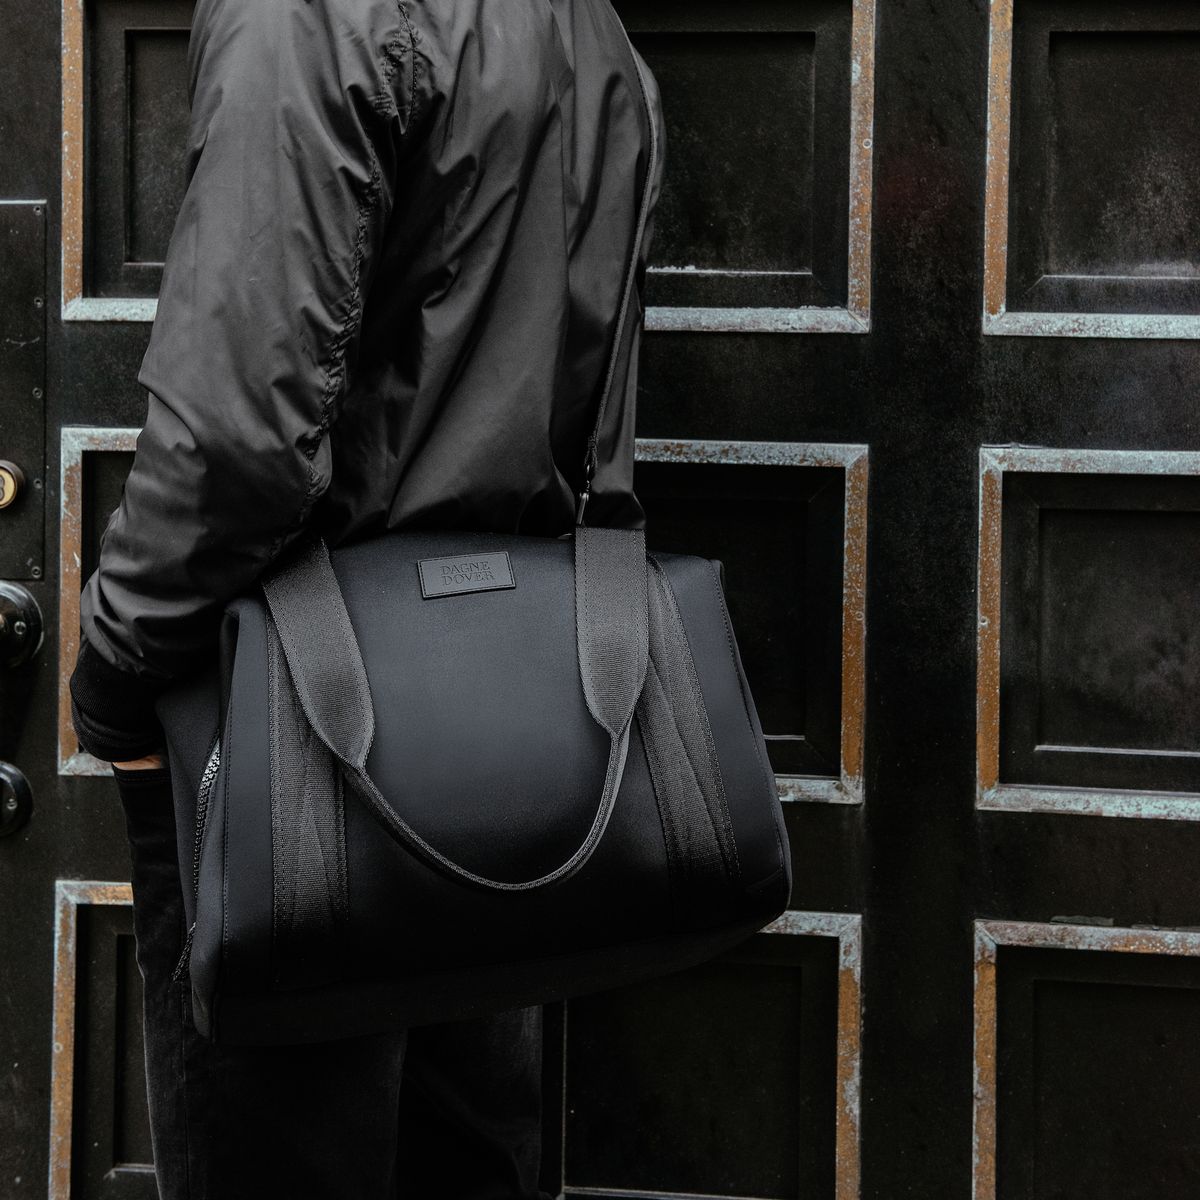 Most spacious travel bags from Dagne Dover